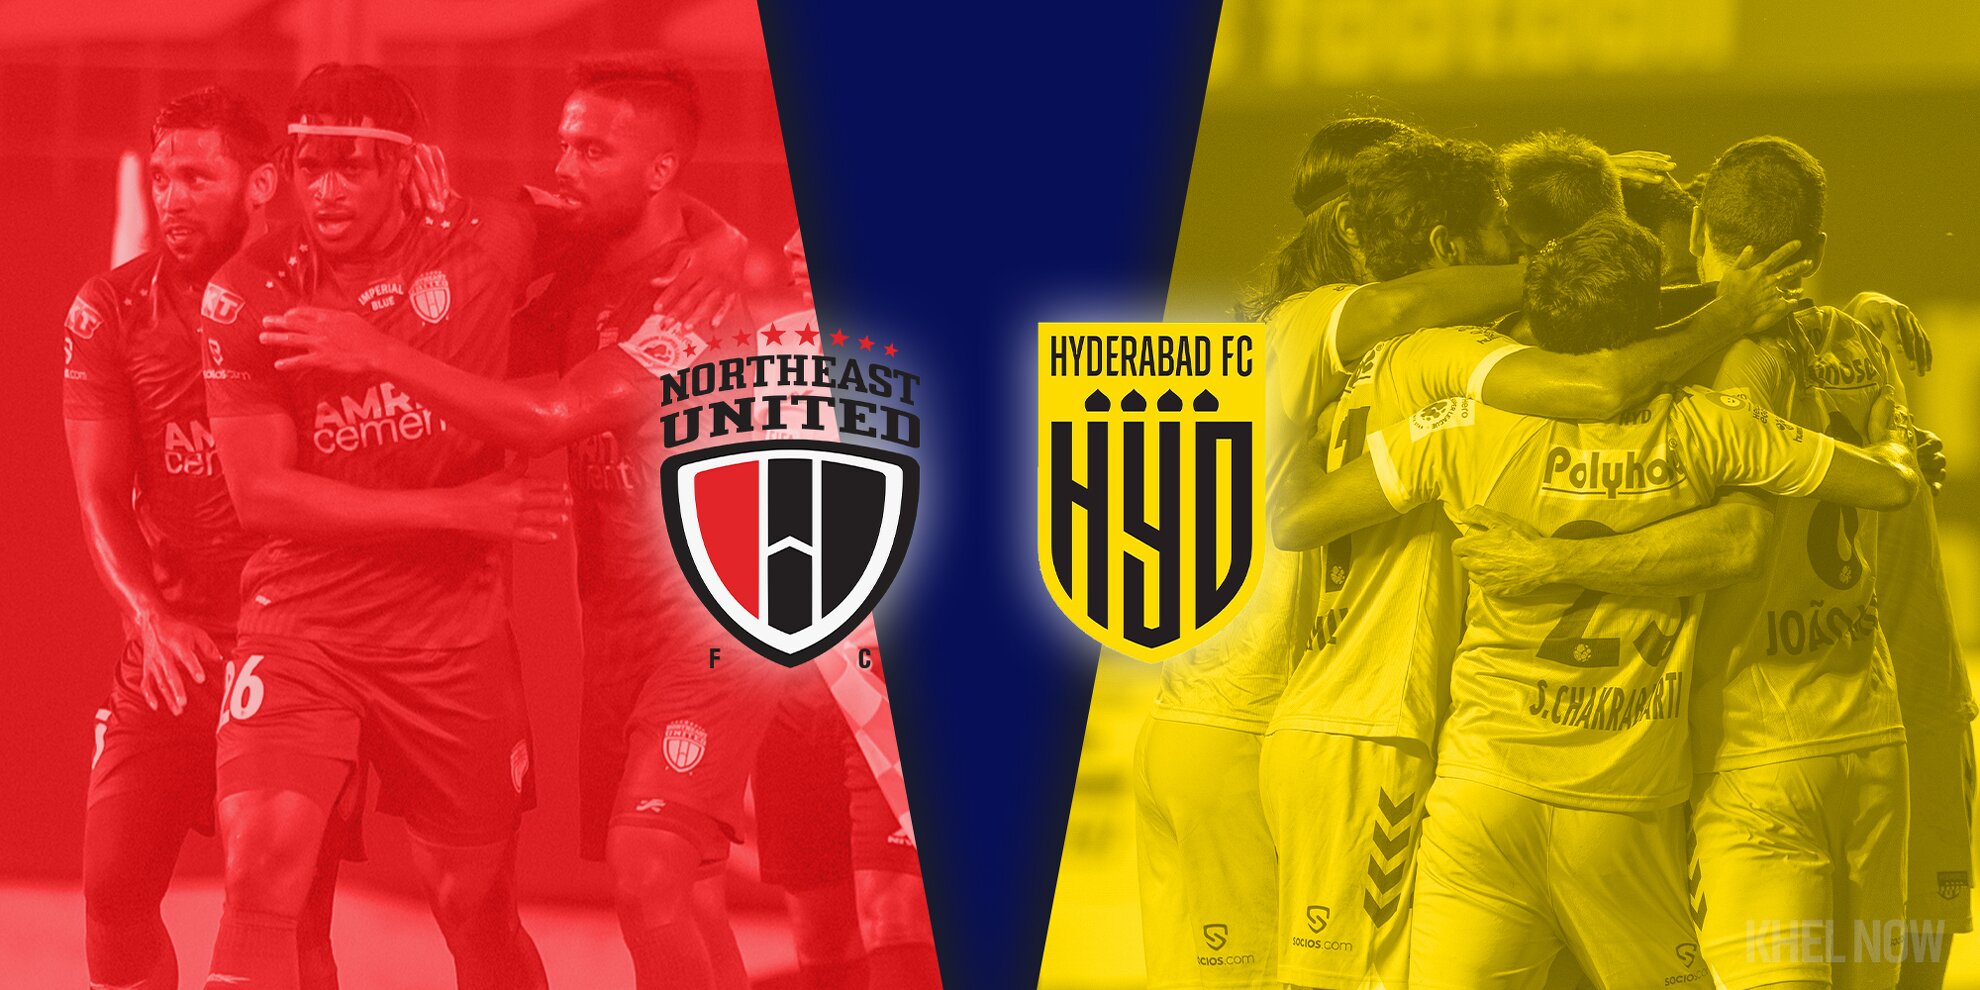 NorthEast United FC vs Hyderabad FC Preview